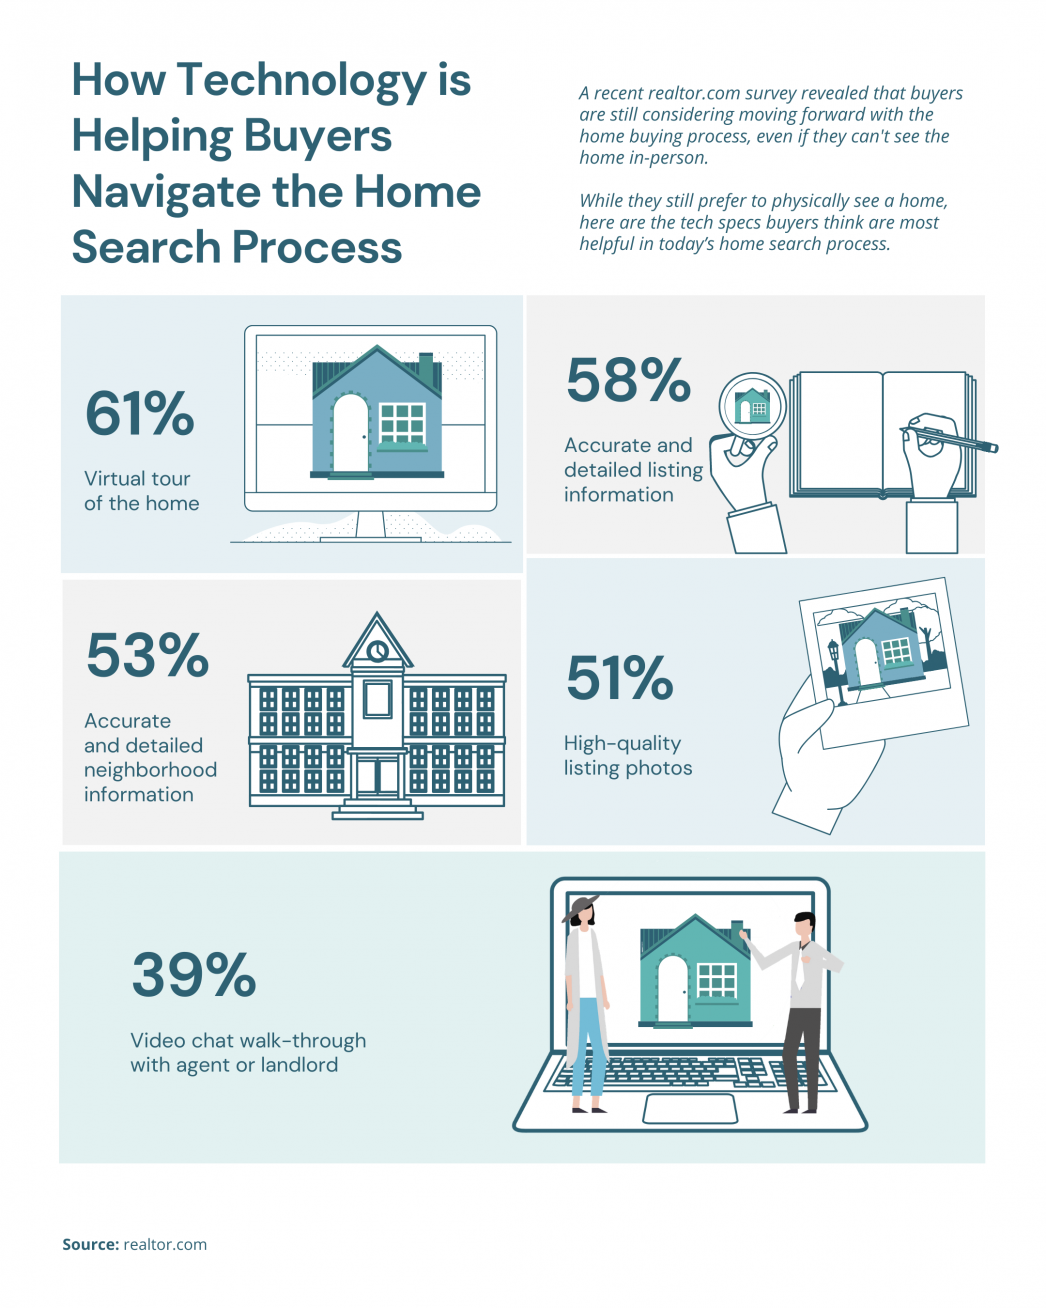 Technology is helping Buyers with Home Search process